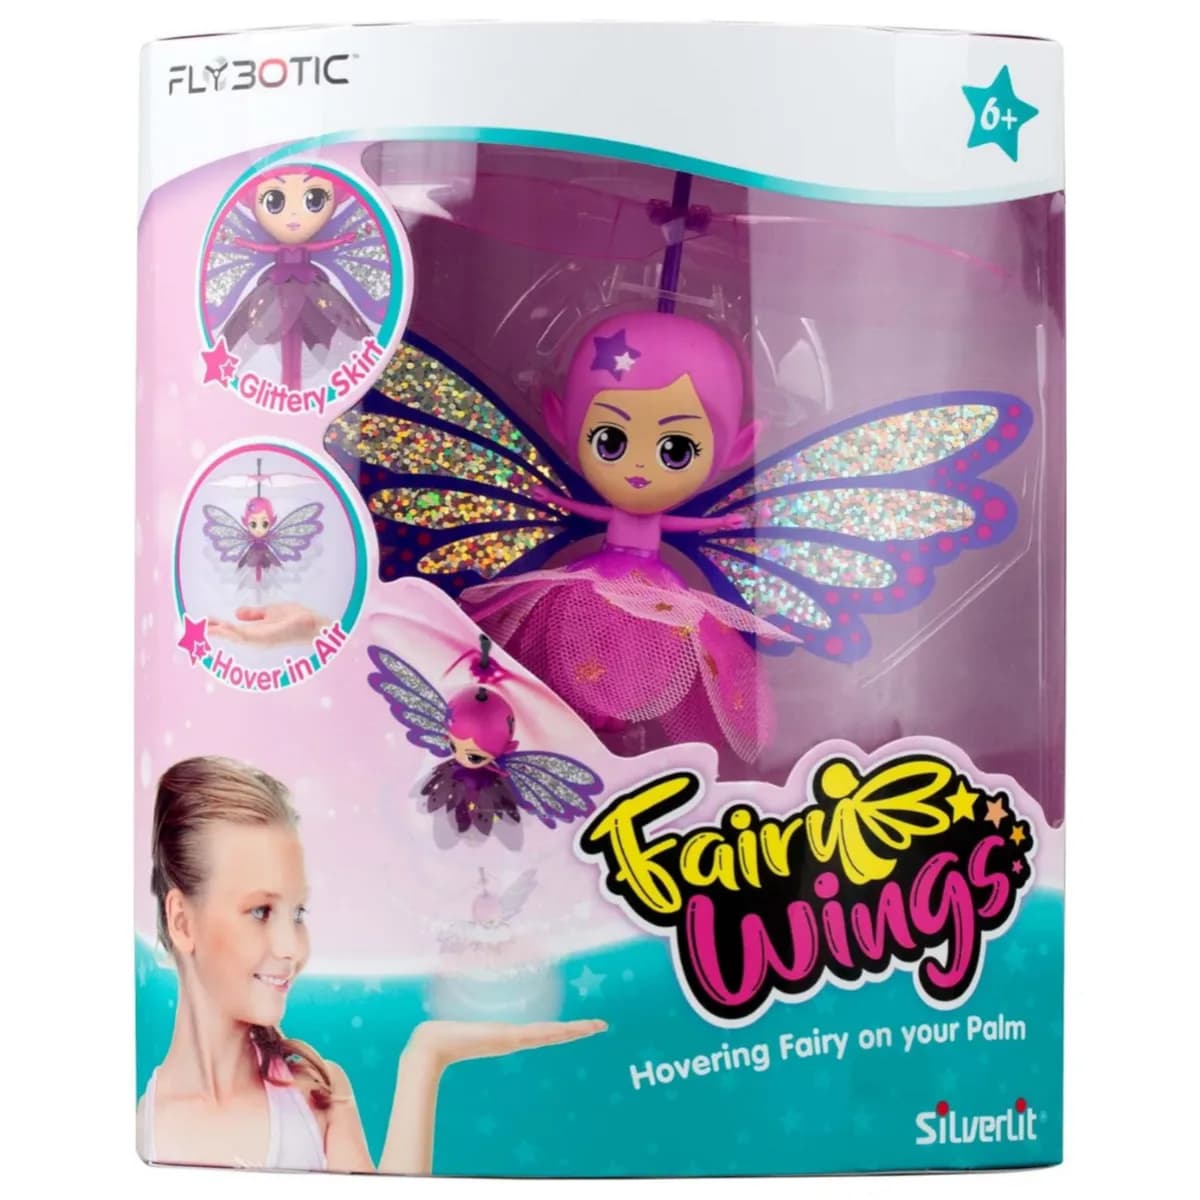 Silverlit Flybotic Hand Controlled Fairy Wings Hovering Fairy On Your Palm Toys For Girls - DEFS13